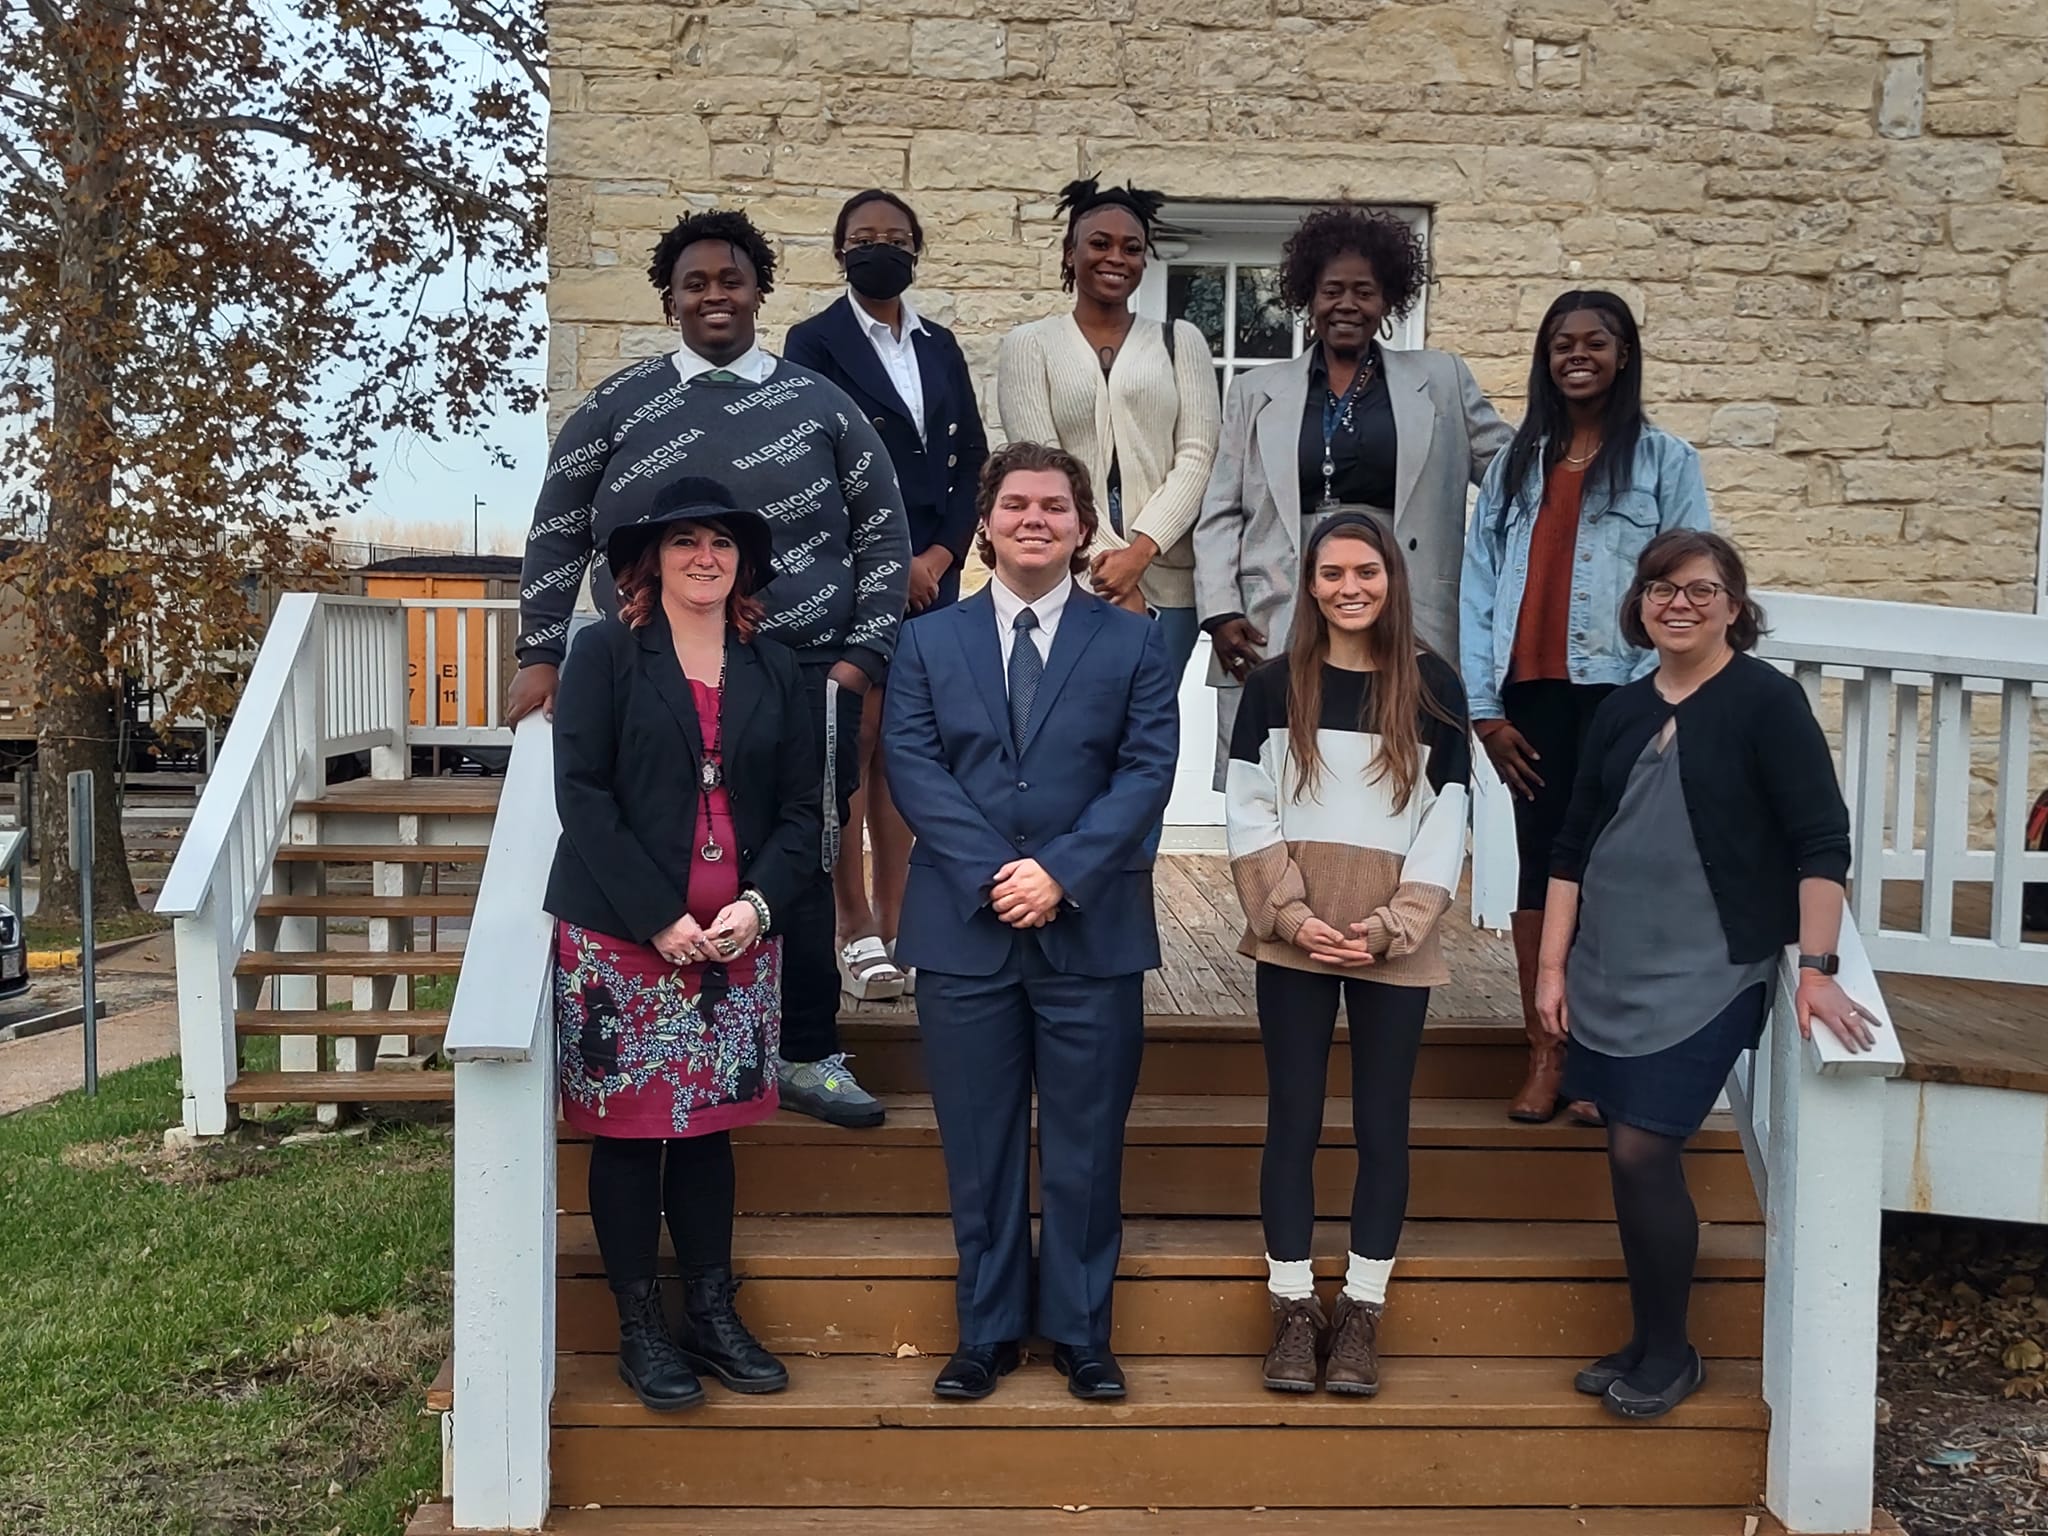 Pictured: Top row (from left to right): Alexandre Mugisha (Political Science), Princess Garner (History), Crystal Taylor (English), Mary Franklin (Sociology), Kennedy Thompson (Psychology); Bottom row (from left to right) Dr. Christine E. Boston (Assistant Professor, Anthropology & Sociology), Louie Delk (History), Jaida Gray (English); Tiffany Patterson (Director, Missouri State Museum)